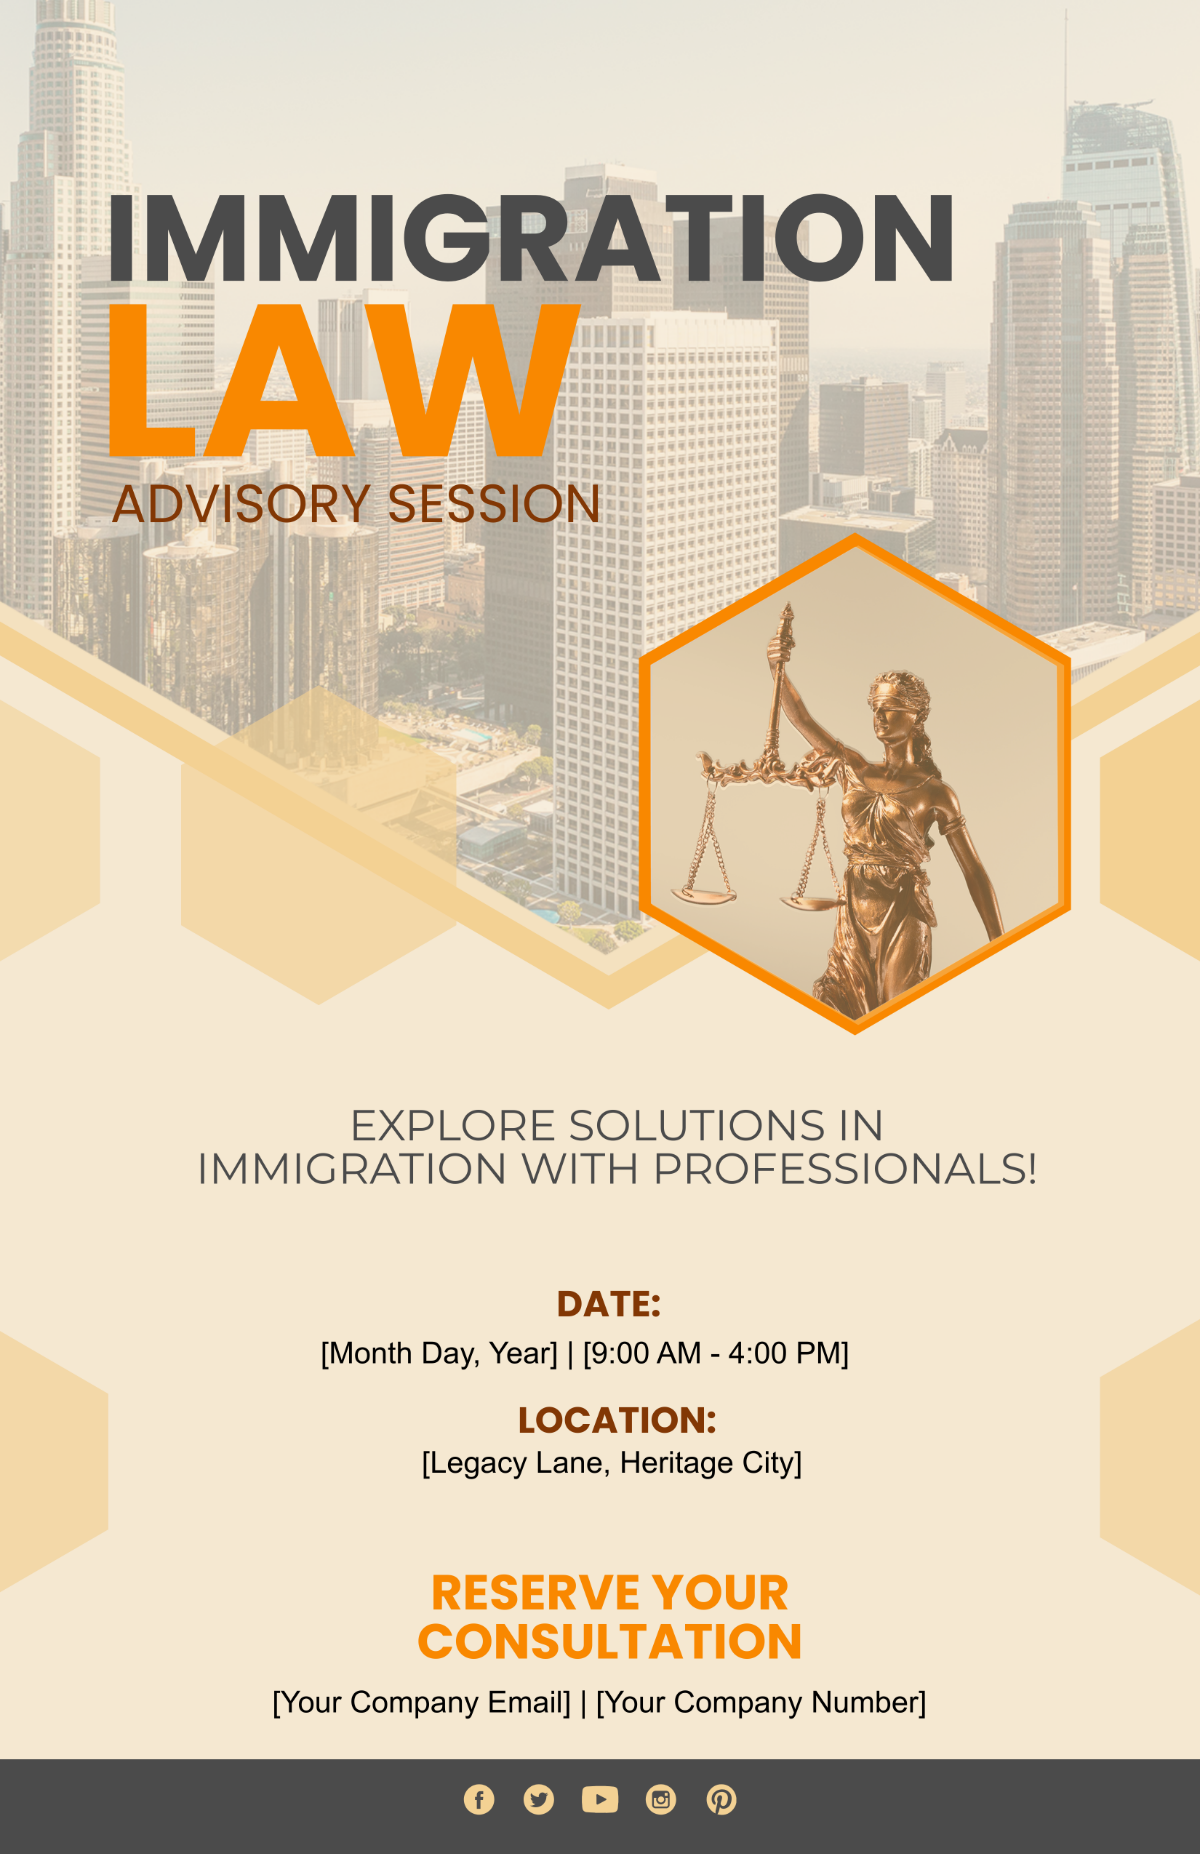 Immigration Law Advisory Session Poster